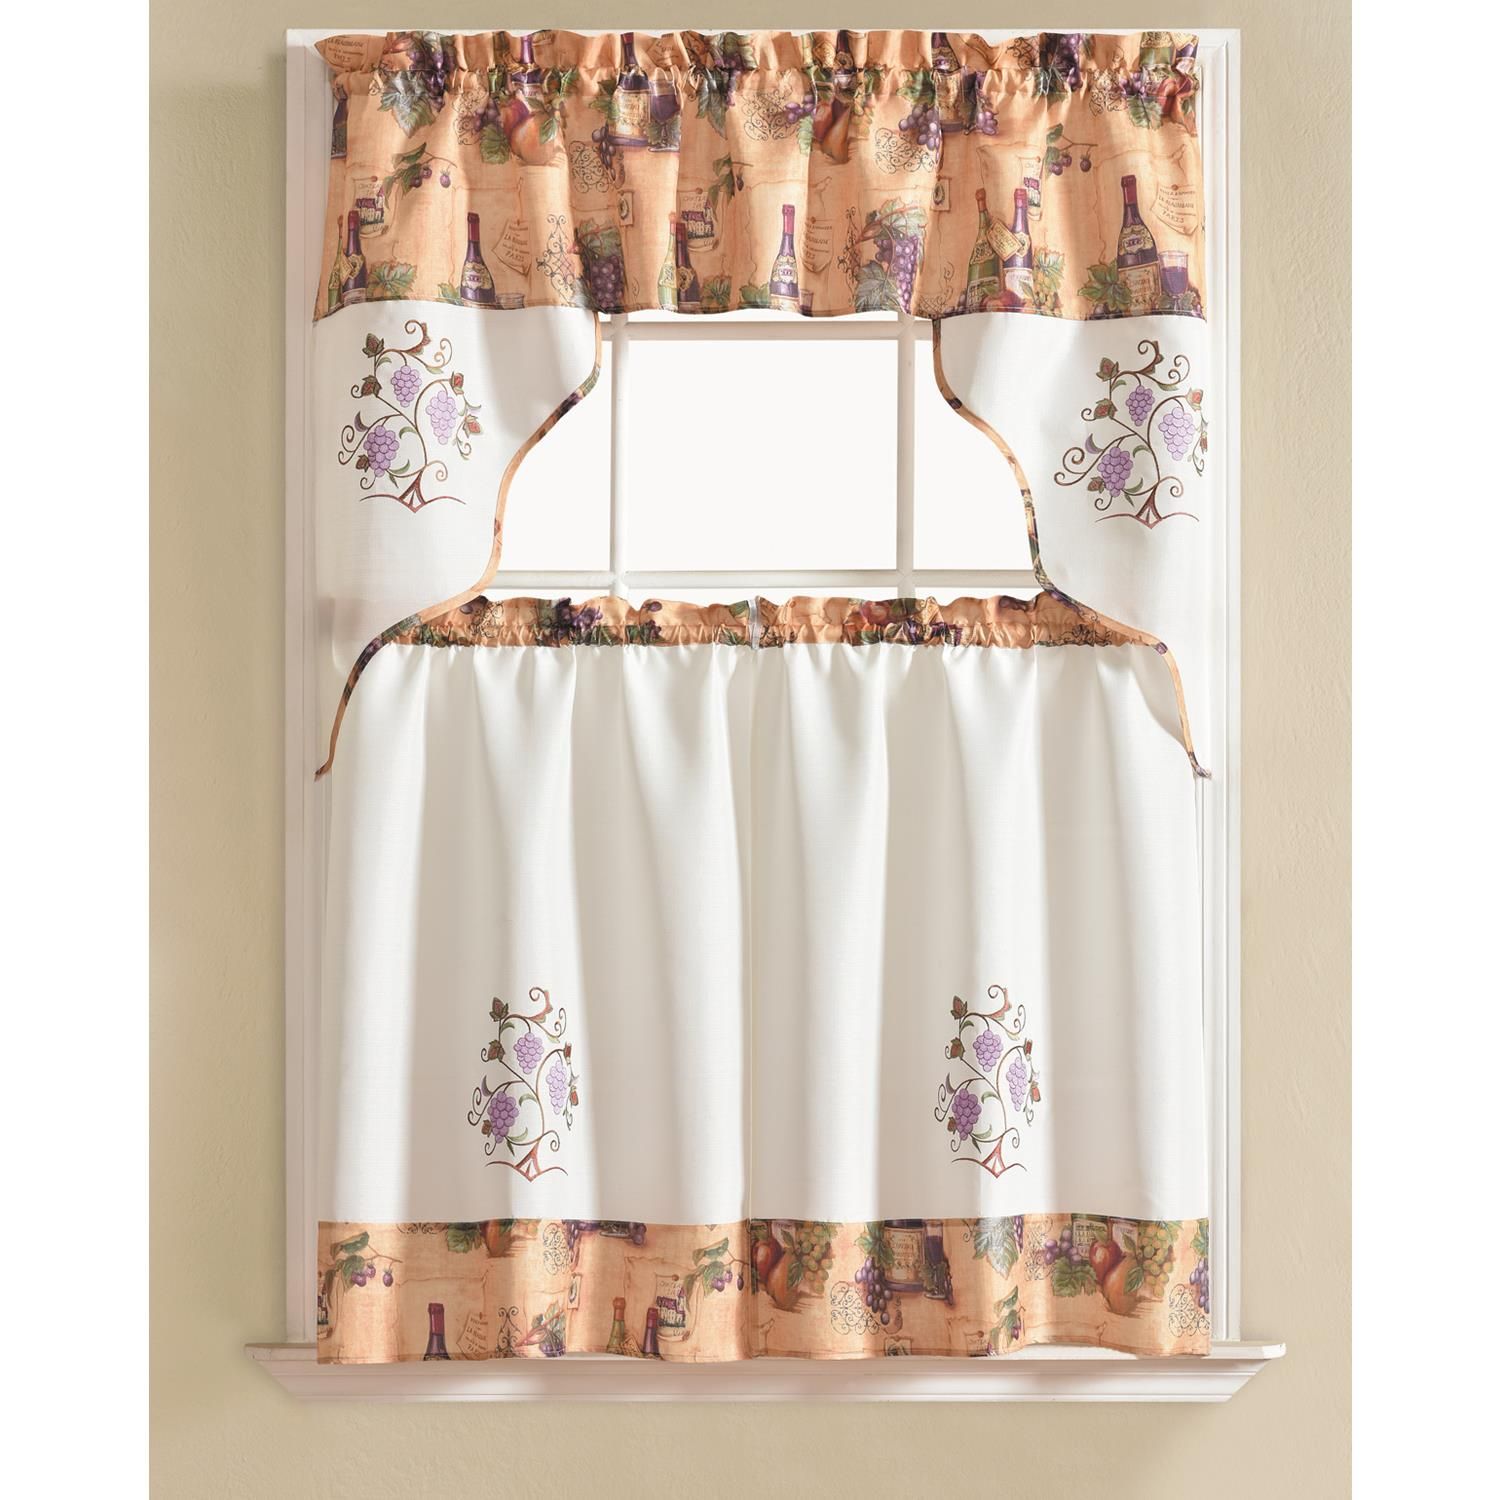 Details About Urban Embroidered Grape Tier And Valance Kitchen Curtain Set,  White/beige/purple With Urban Embroidered Tier And Valance Kitchen Curtain Tier Sets (Photo 1 of 20)